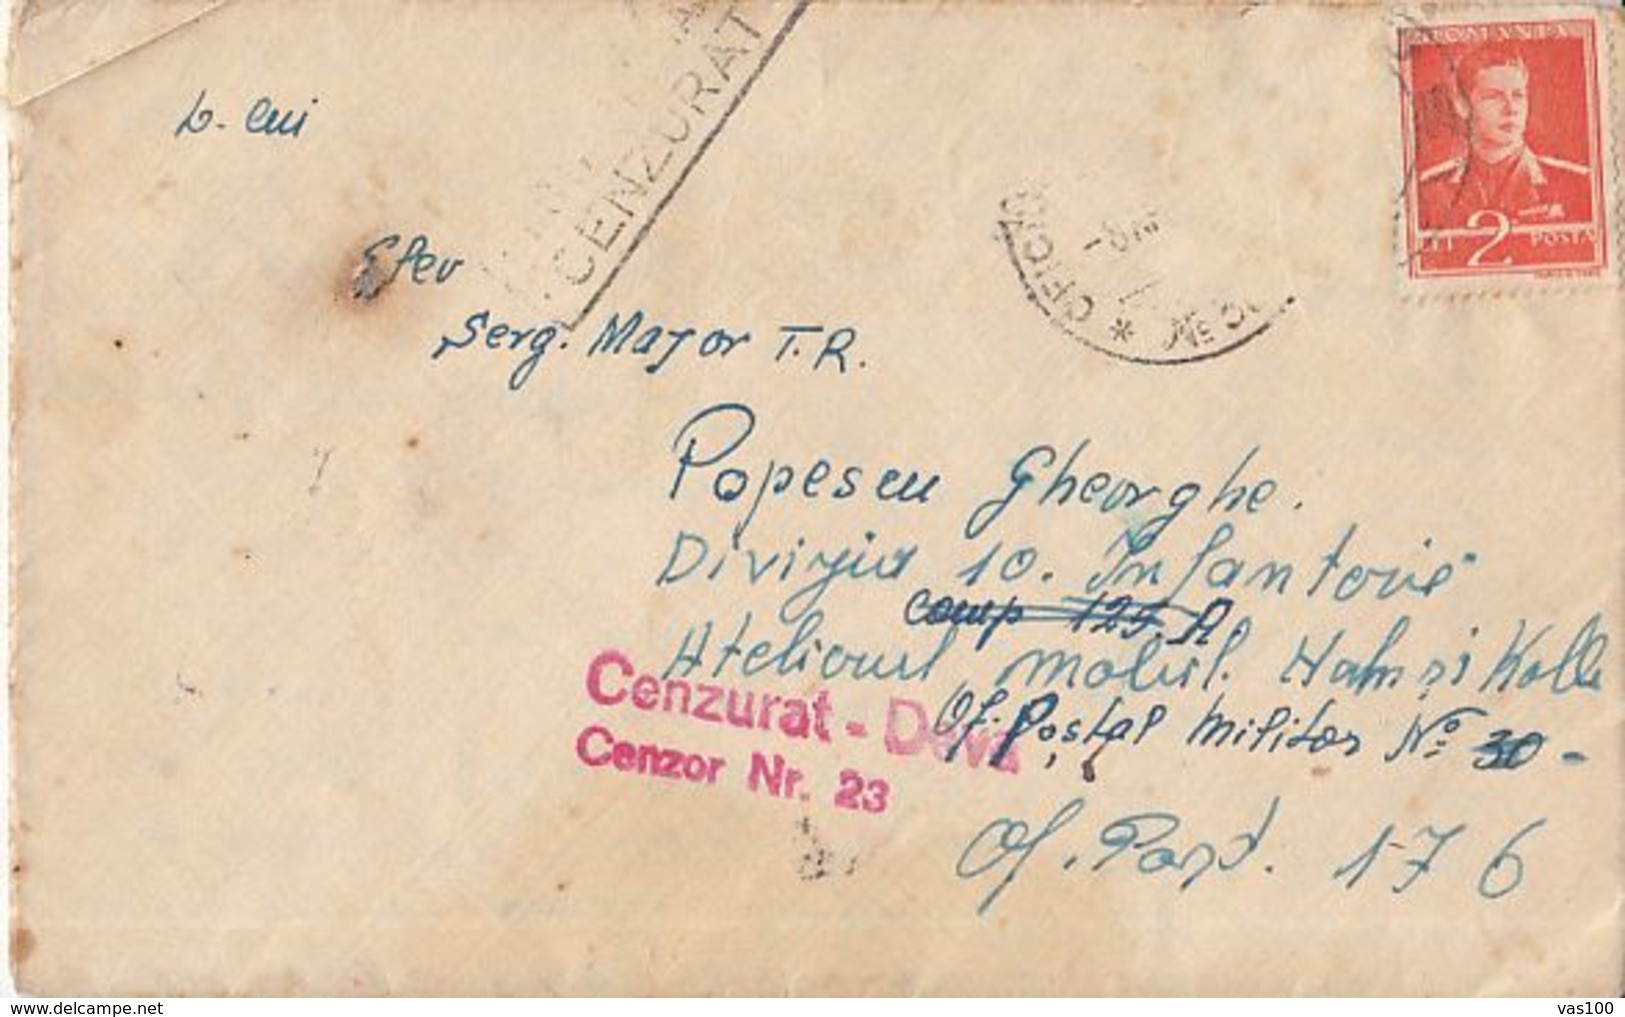 WW2 LETTER, MILITARY CENSORED, DEVA NR 23, WARFIELD POST OFFICE NR 30, 176, KING MICHAEL STAMP ON COVER, 1942, ROMANIA - World War 2 Letters